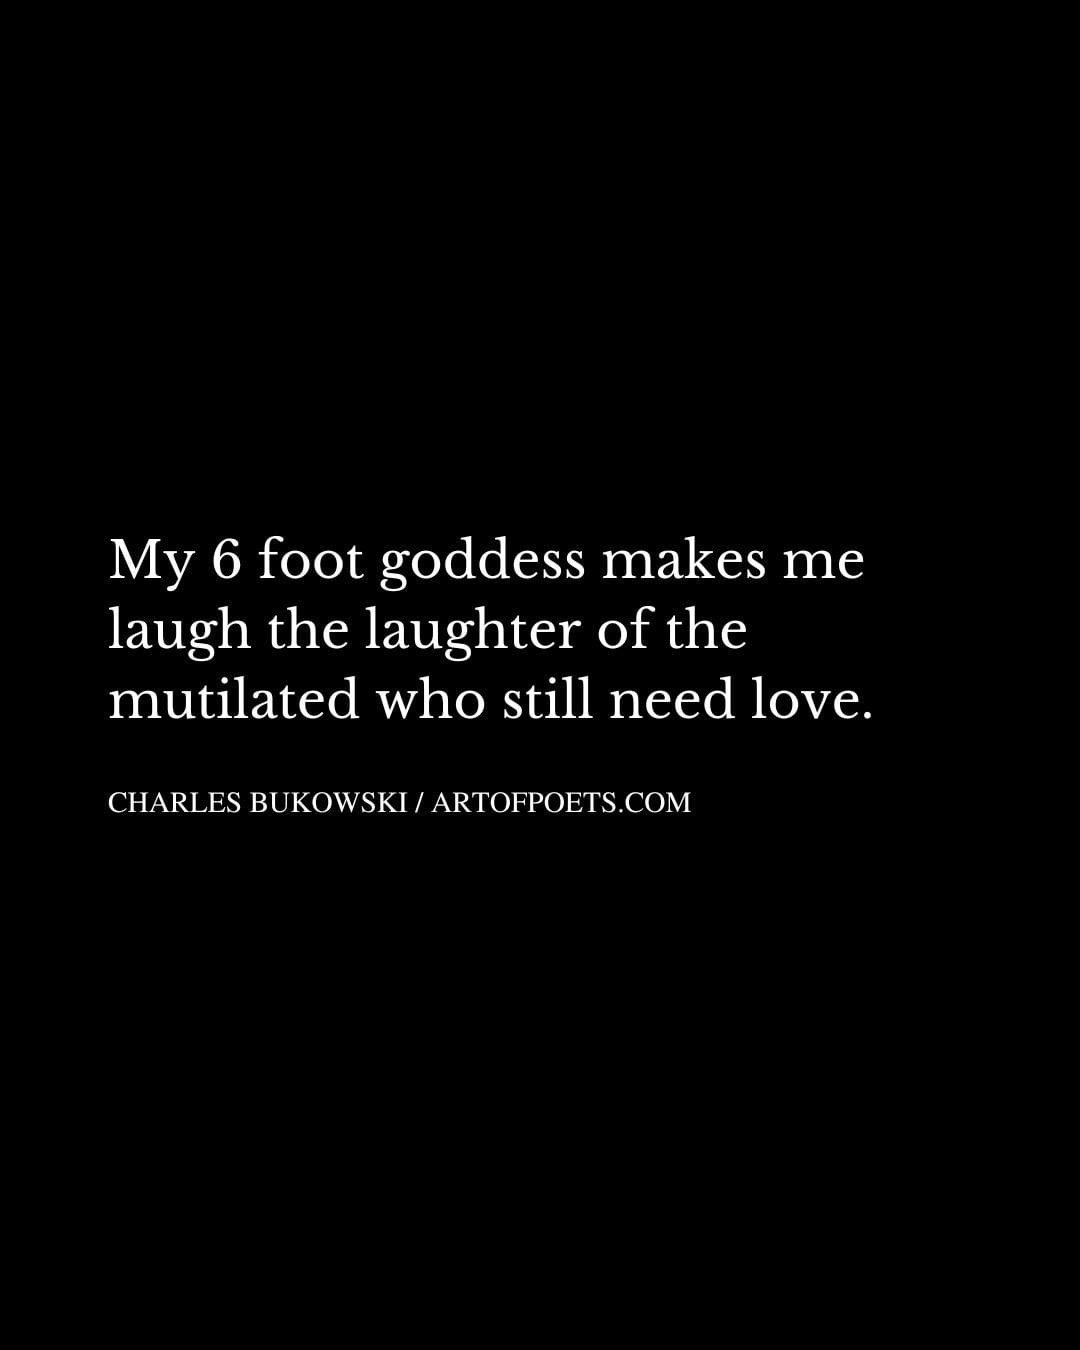 My 6 foot goddess makes me laugh the laughter of the mutilated who still need love